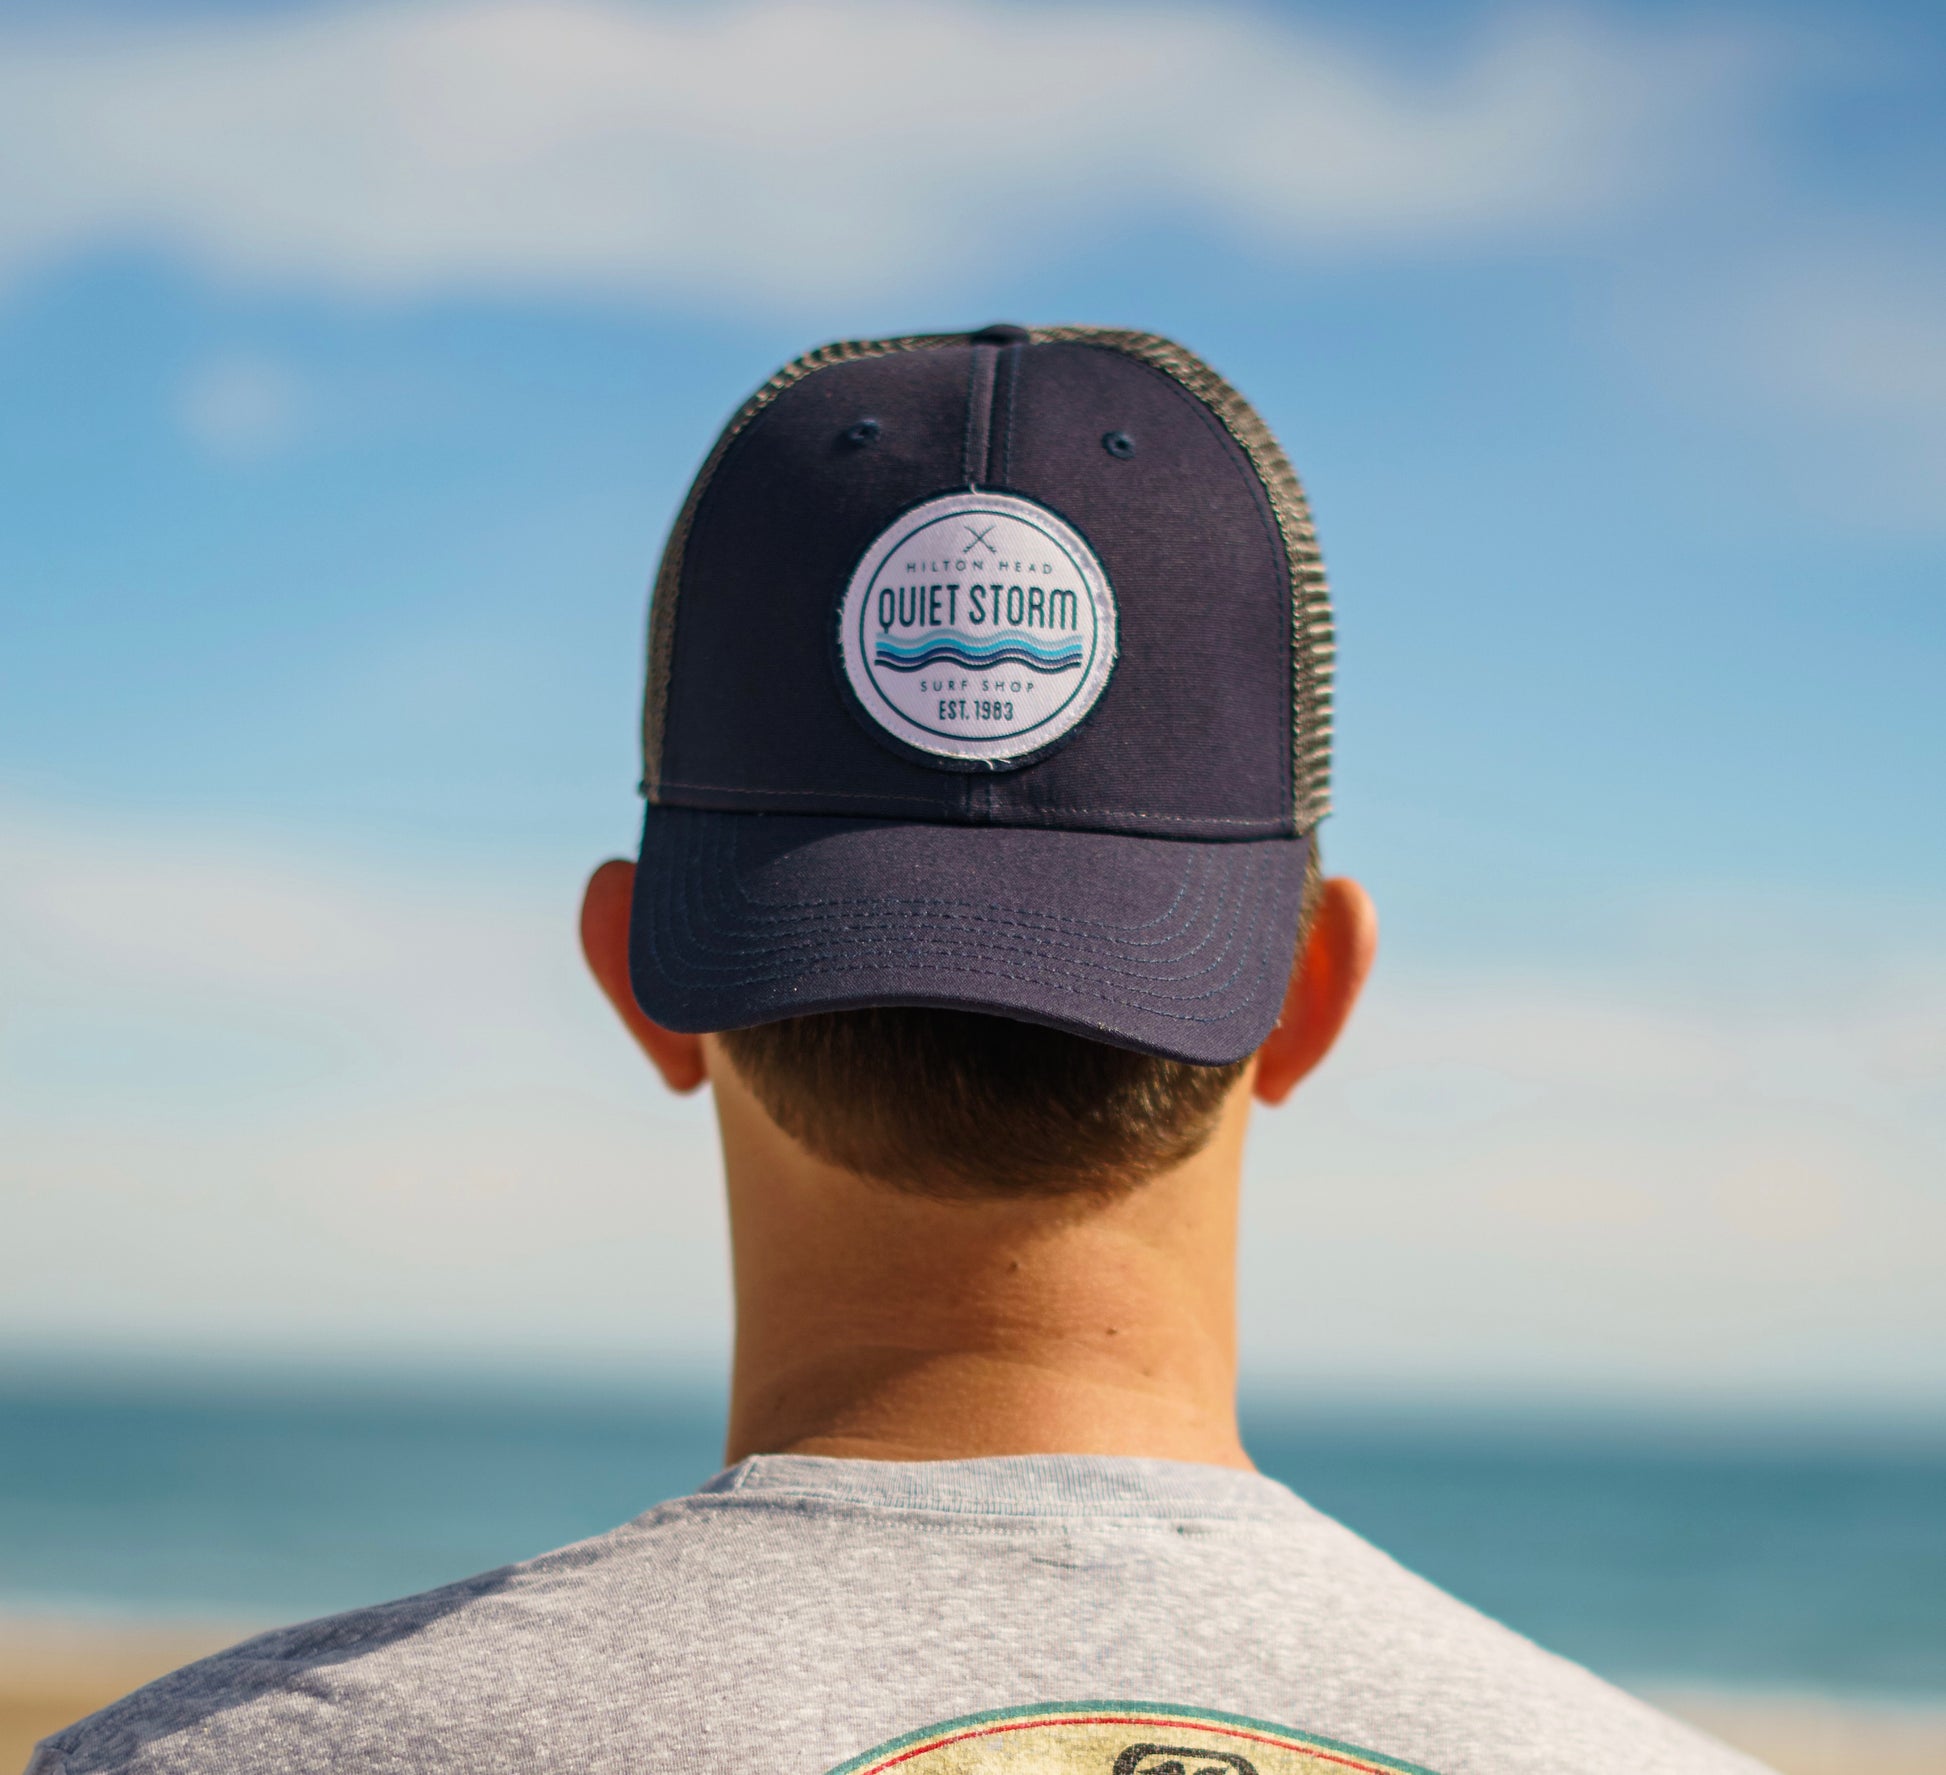 A man wearing a navy and grey hat with a mesh back and a patch featuring two crossed surfboards and the text 'Quiet Storm Hilton Head Surf Shop'."